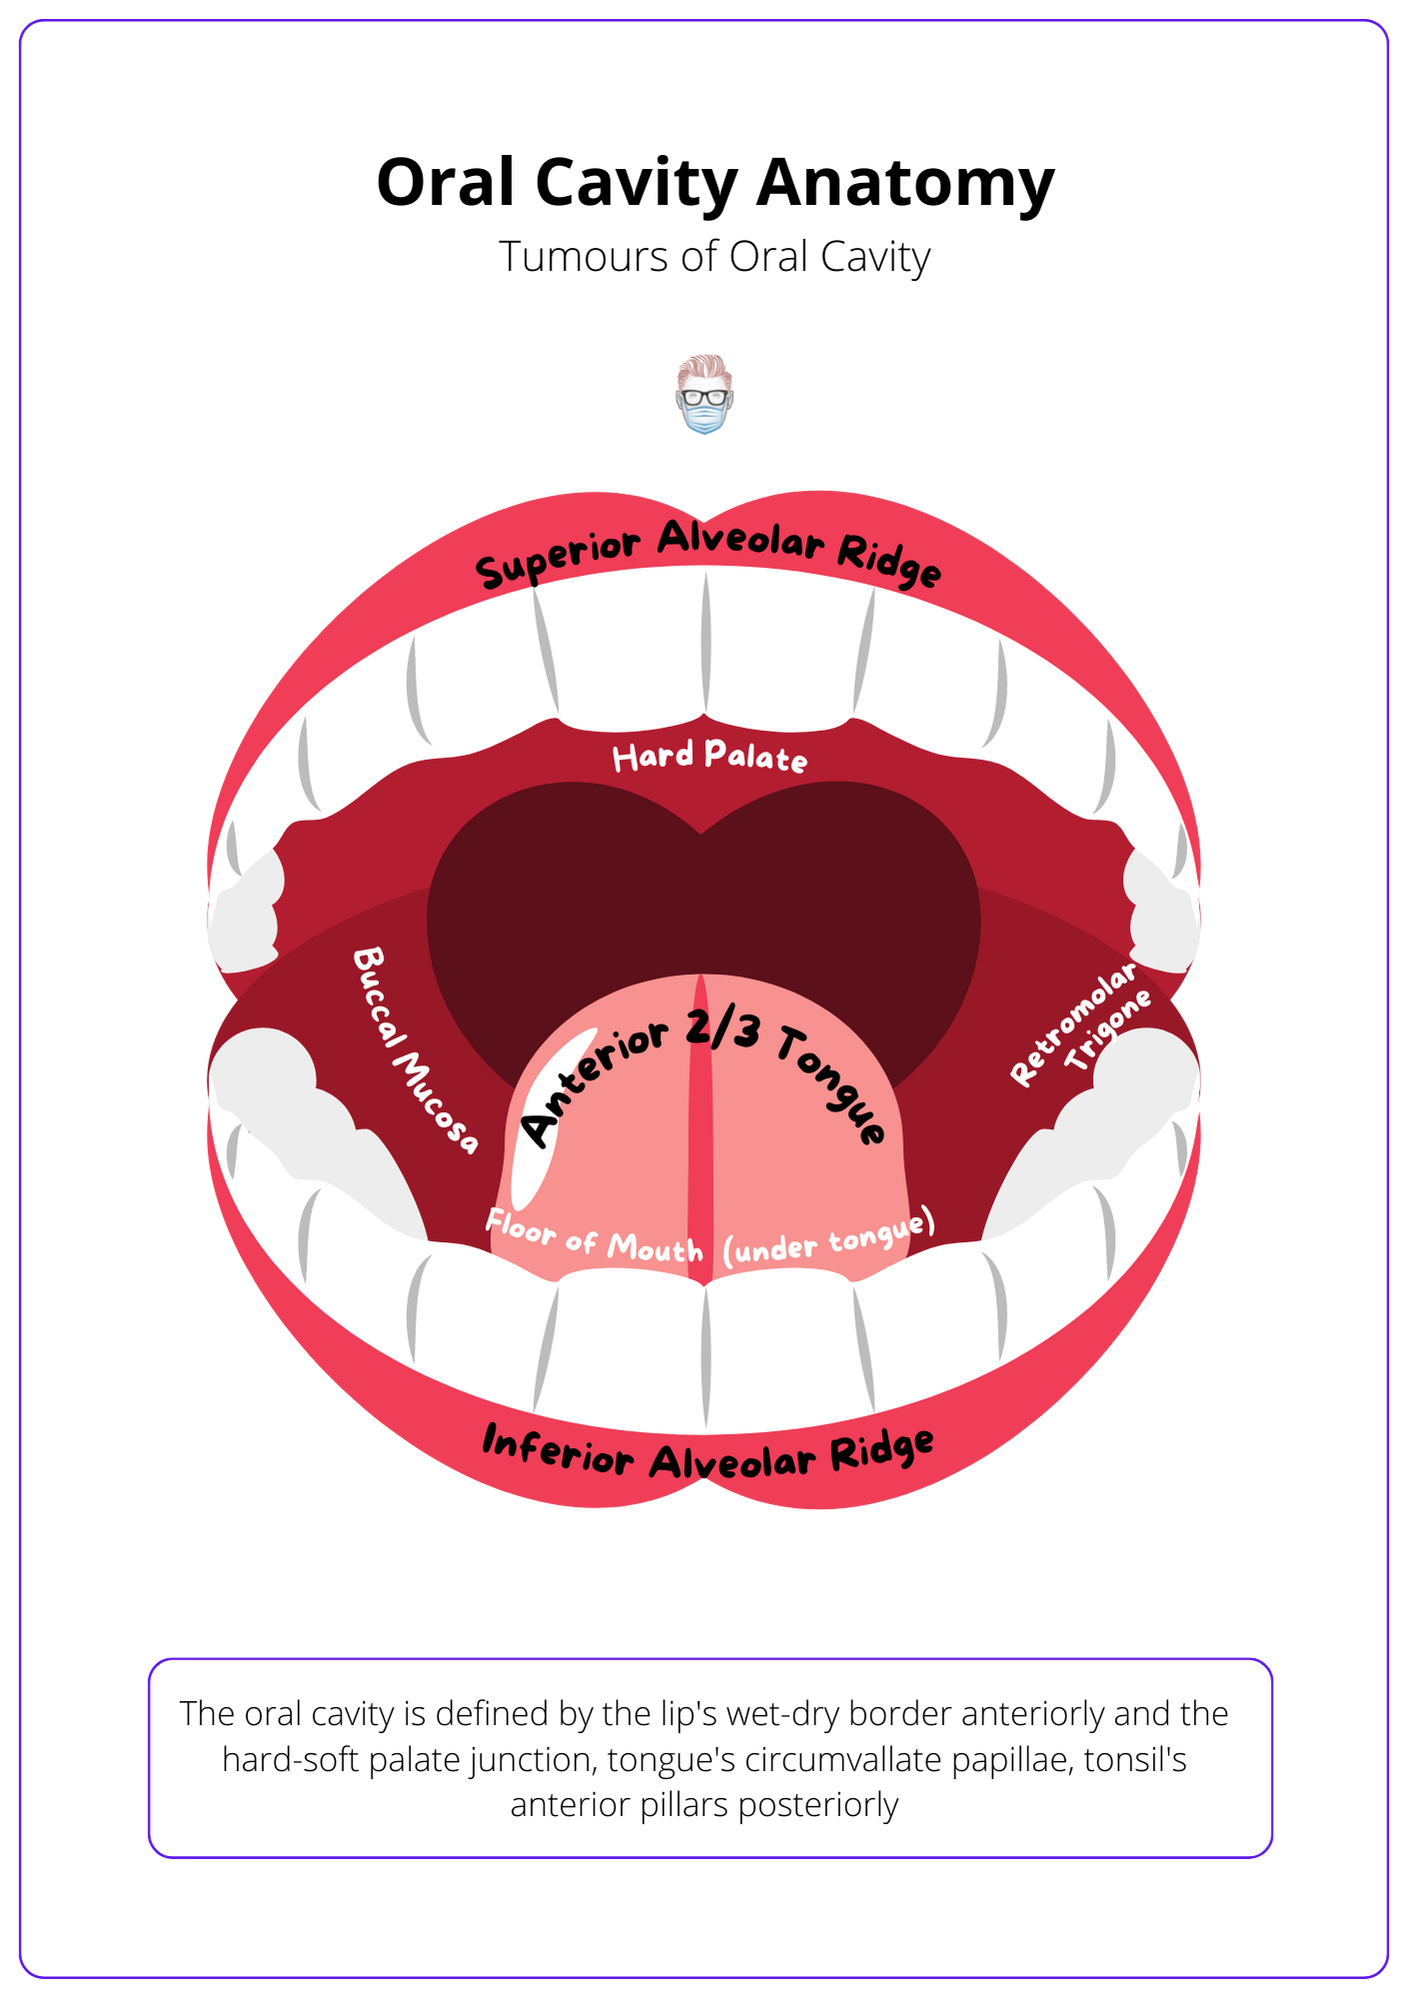 A labelled diagram of the oral cavity anatomy which contains the hard palate, buccal mucosa, retromolar trigone, floor of mouth, anterior 2/3 of tongue and inferior alveolar ridge.